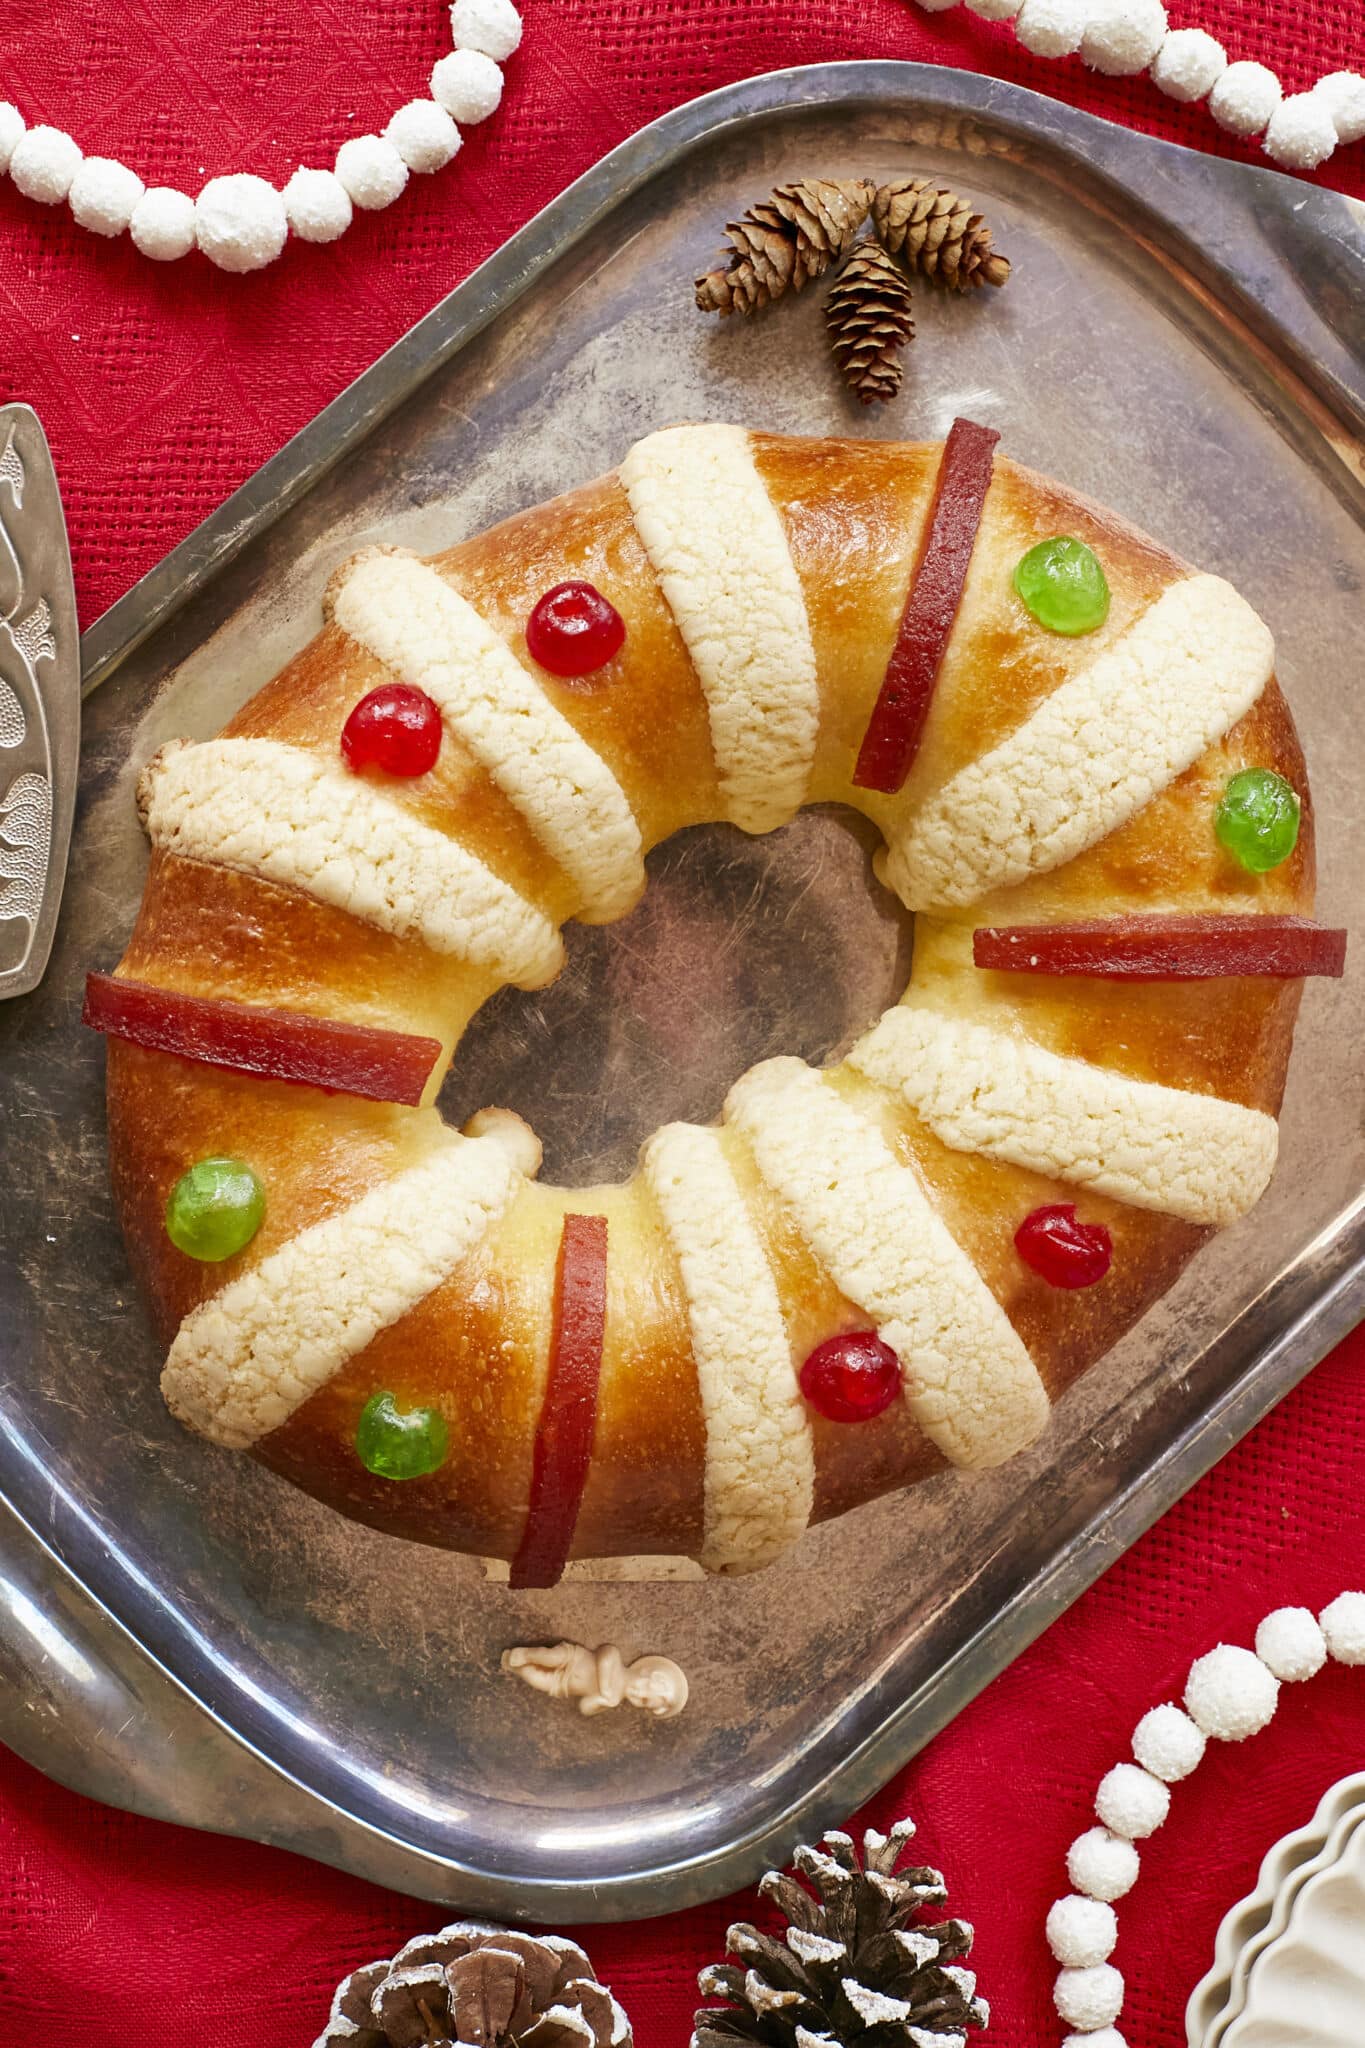 Rosca de Reyes (Three Kings Bread)is baked until golden brown. It's infused with orange zest and decorated with festive candied cherries, strips of quince paste, and sugar paste. 